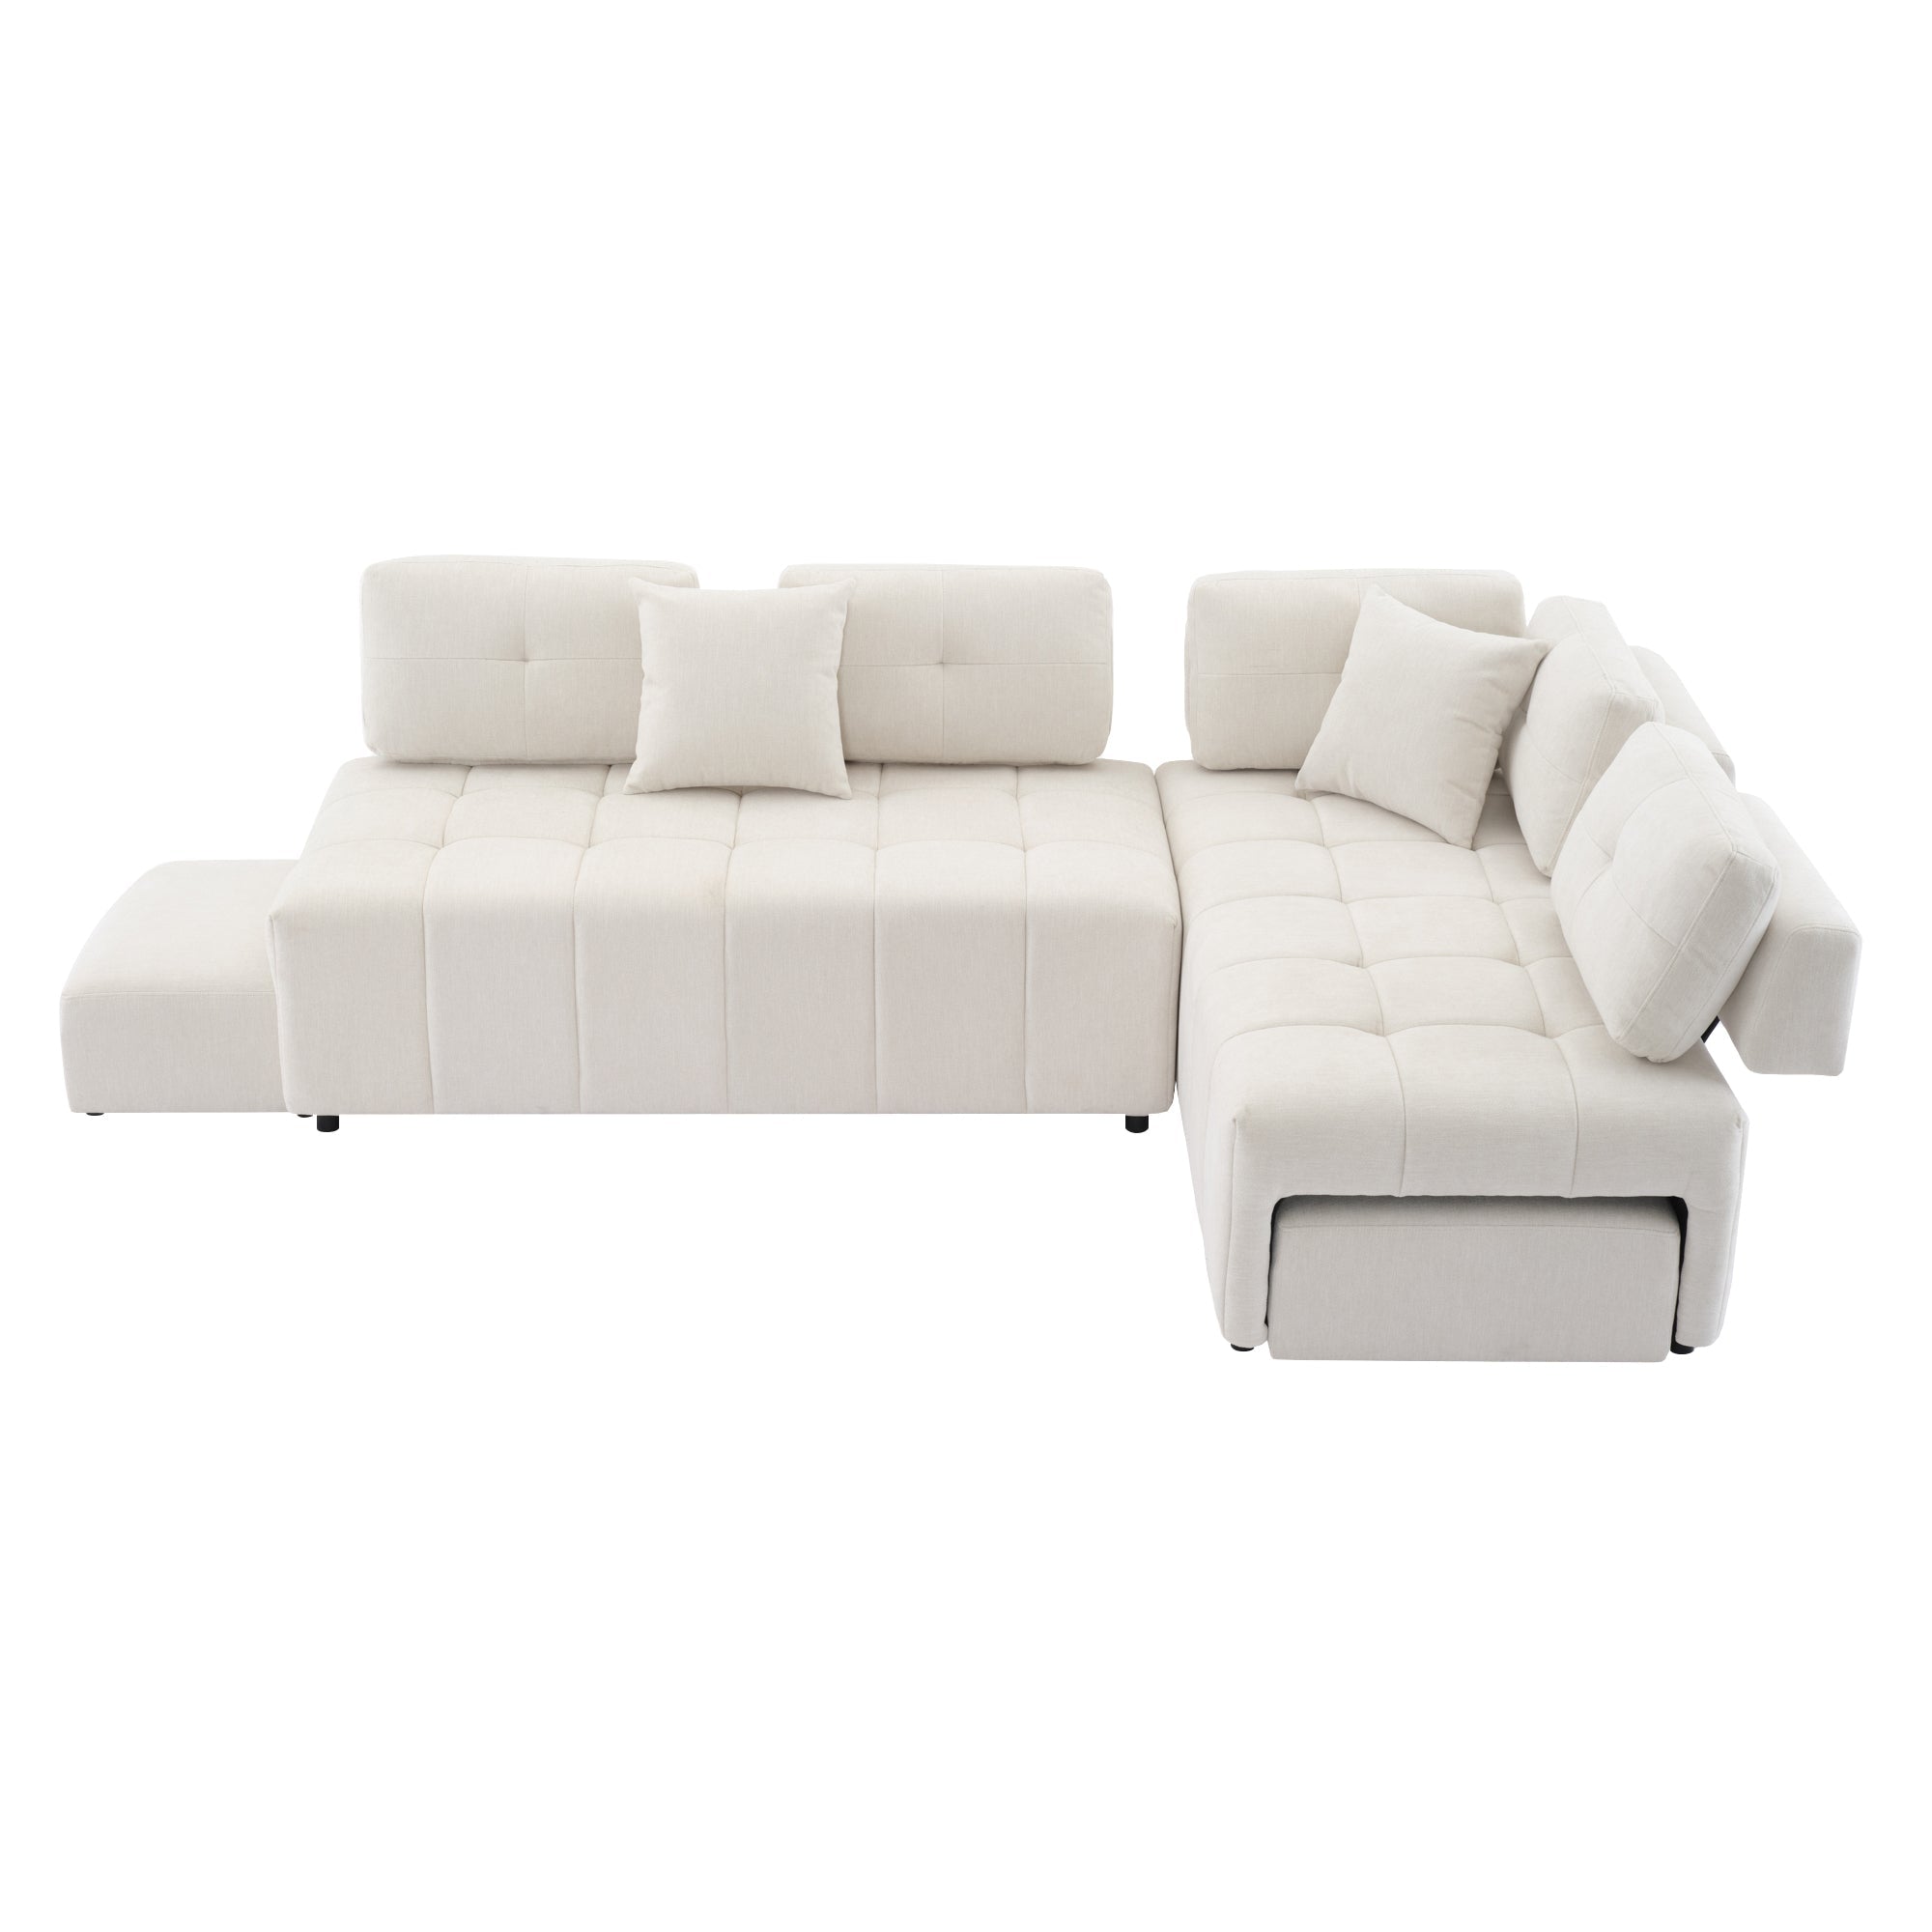 L-Shaped Sectional Sofa Couch, 91.73", Biege w/ 2 Stools & Lumbar Pillows | Living Room-Stationary Sectionals-American Furniture Outlet